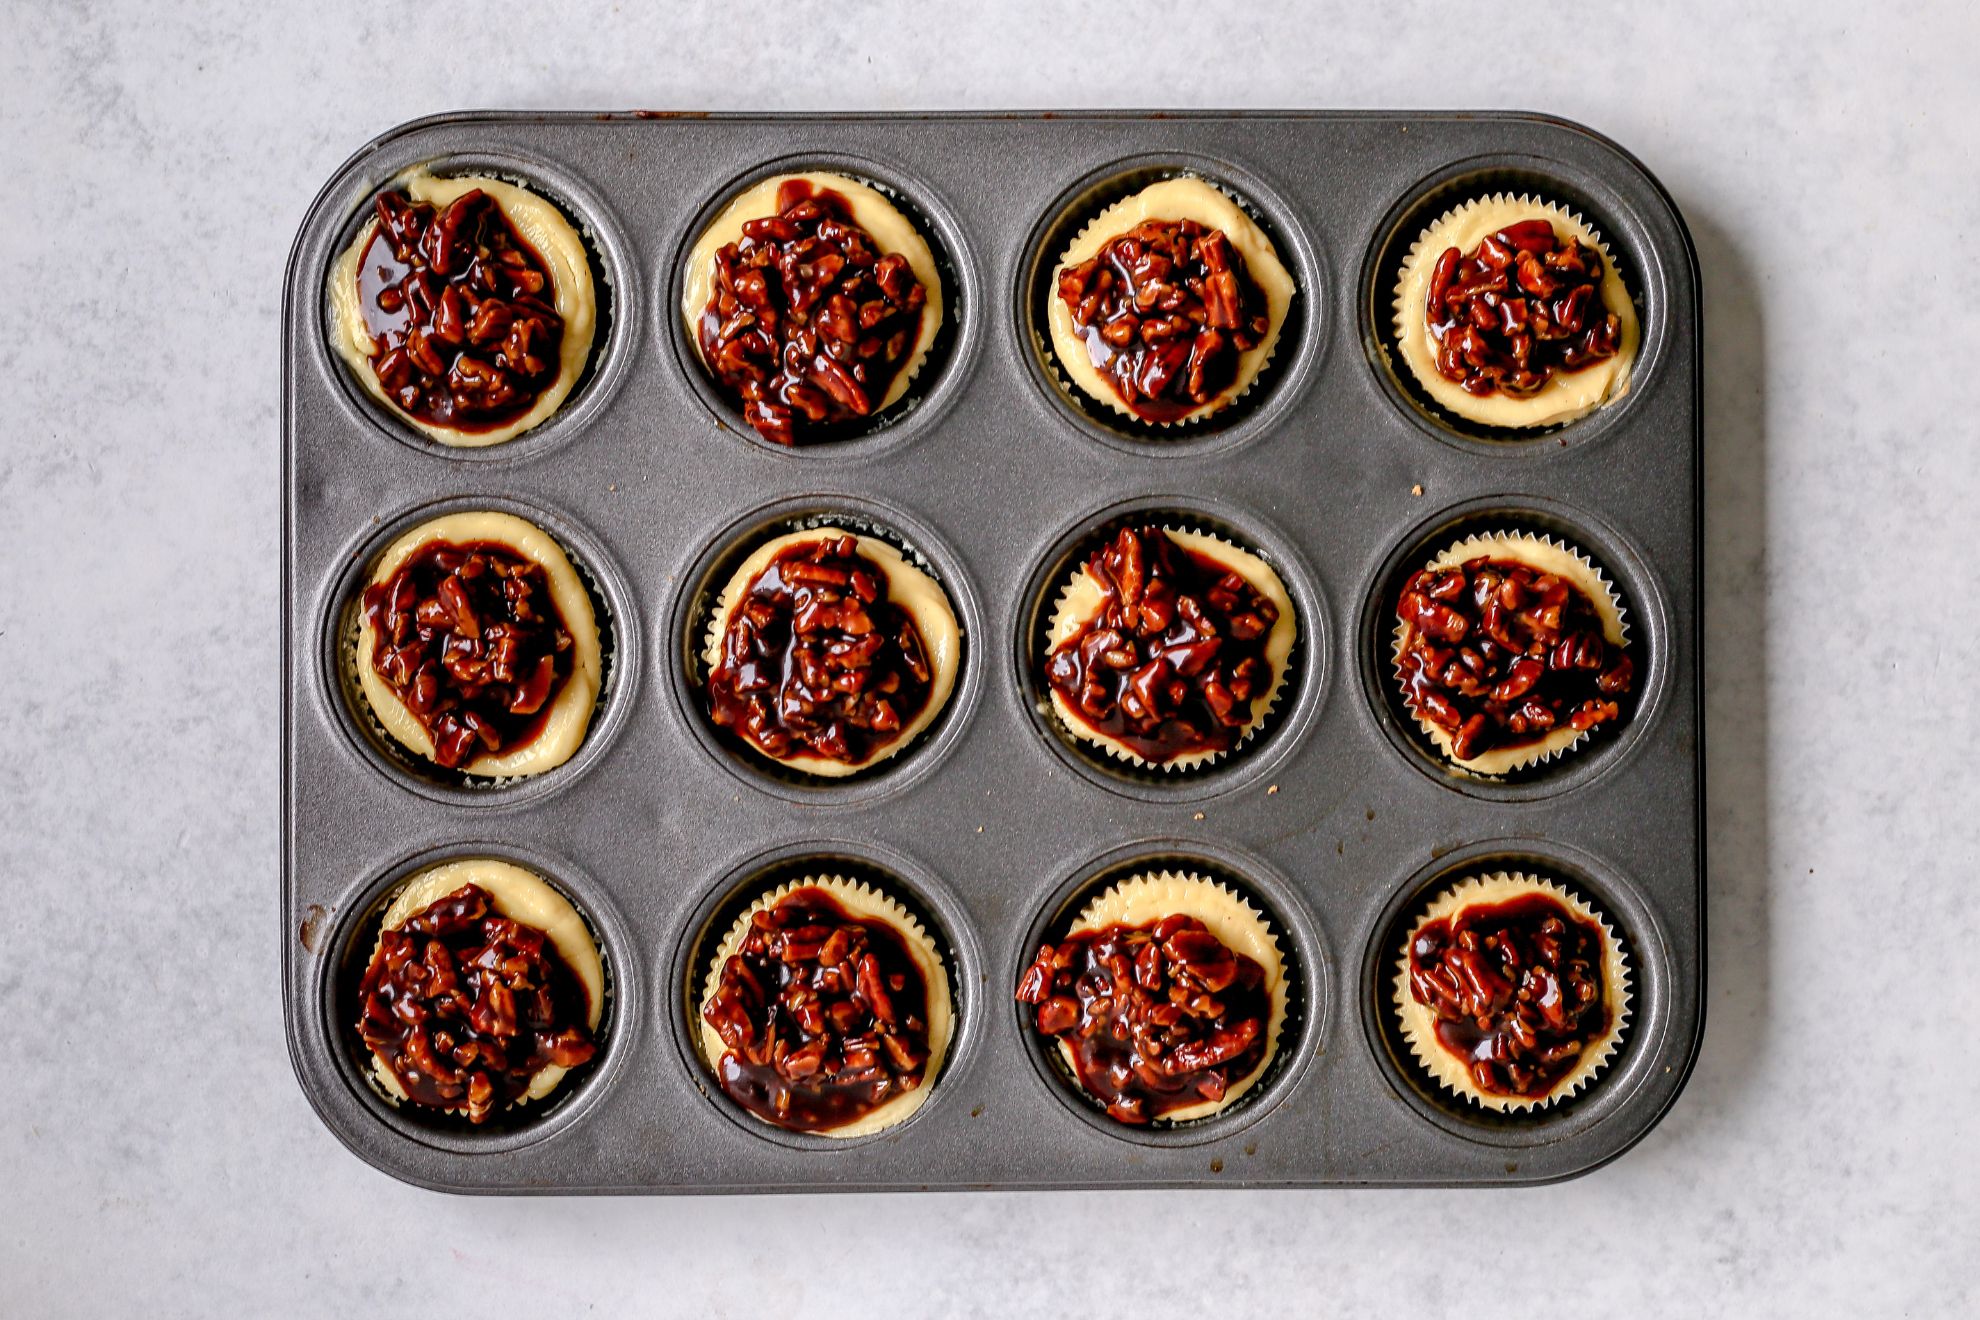 This is an overhead image of a muffin tin filled with individual cheesecakes topped with pecans. The muffin tin sits on a light surface.